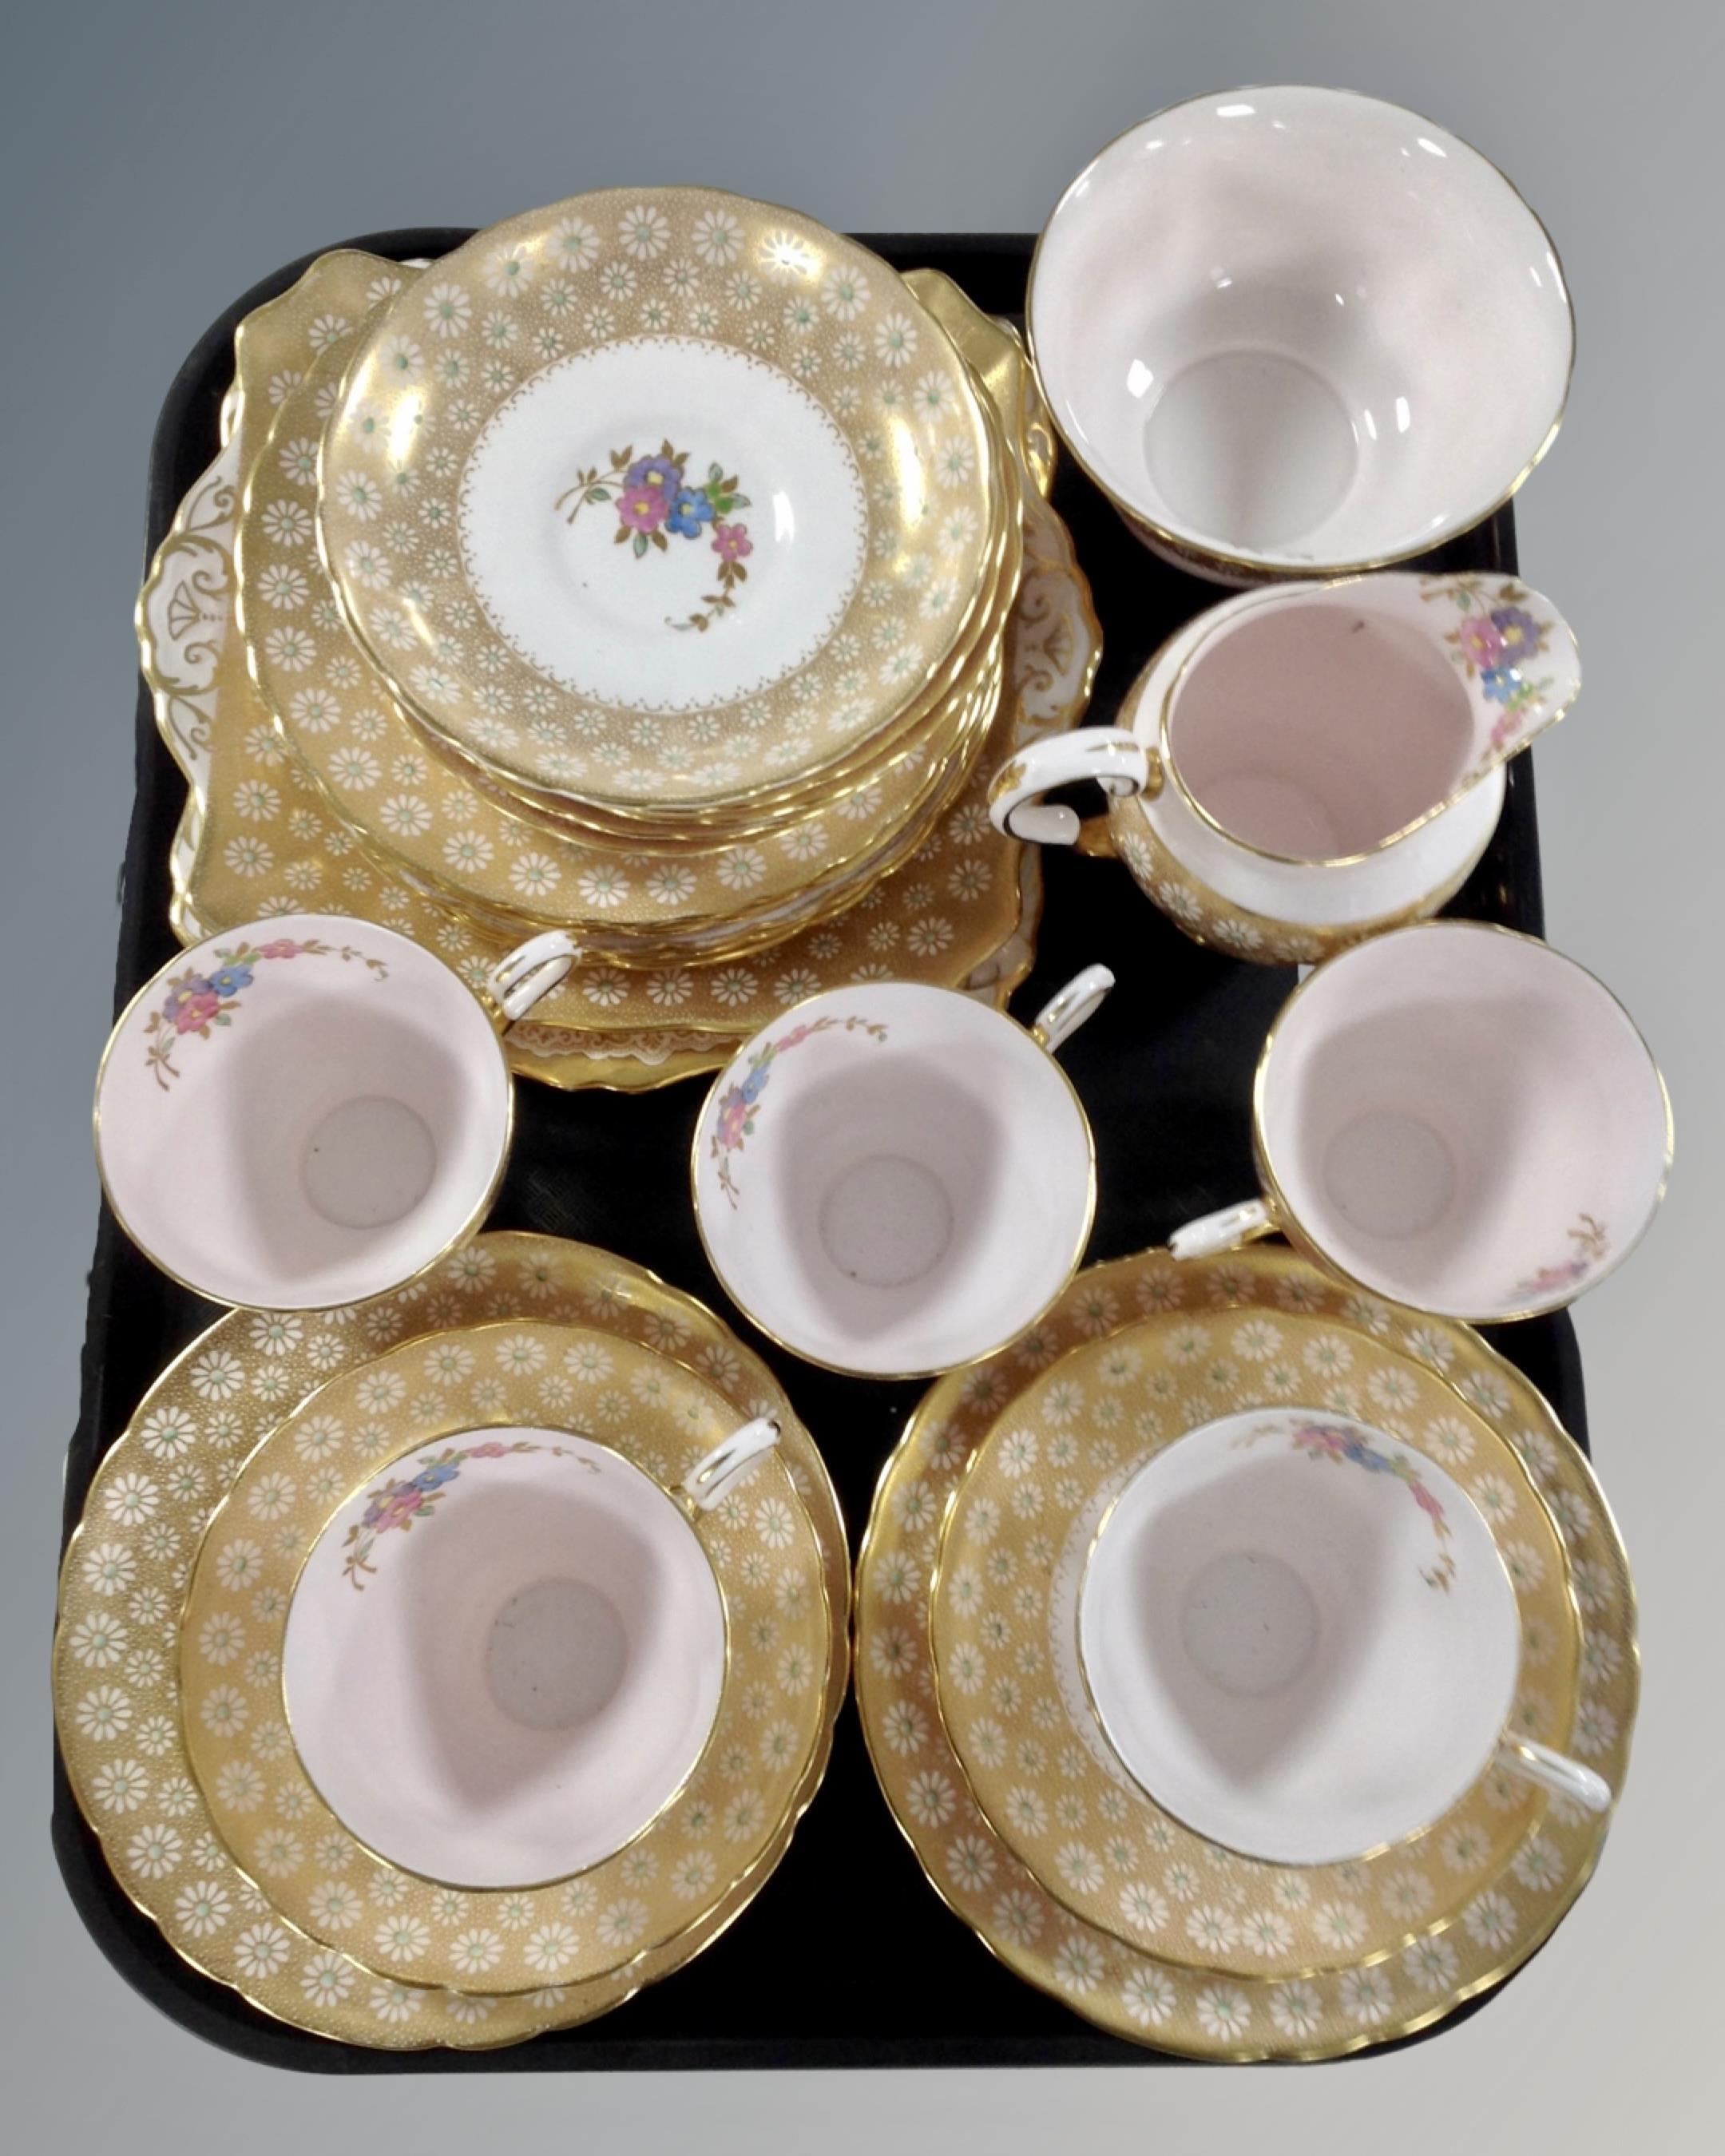 Approximately 24 pieces of Tuscan pink and gilt tea china.